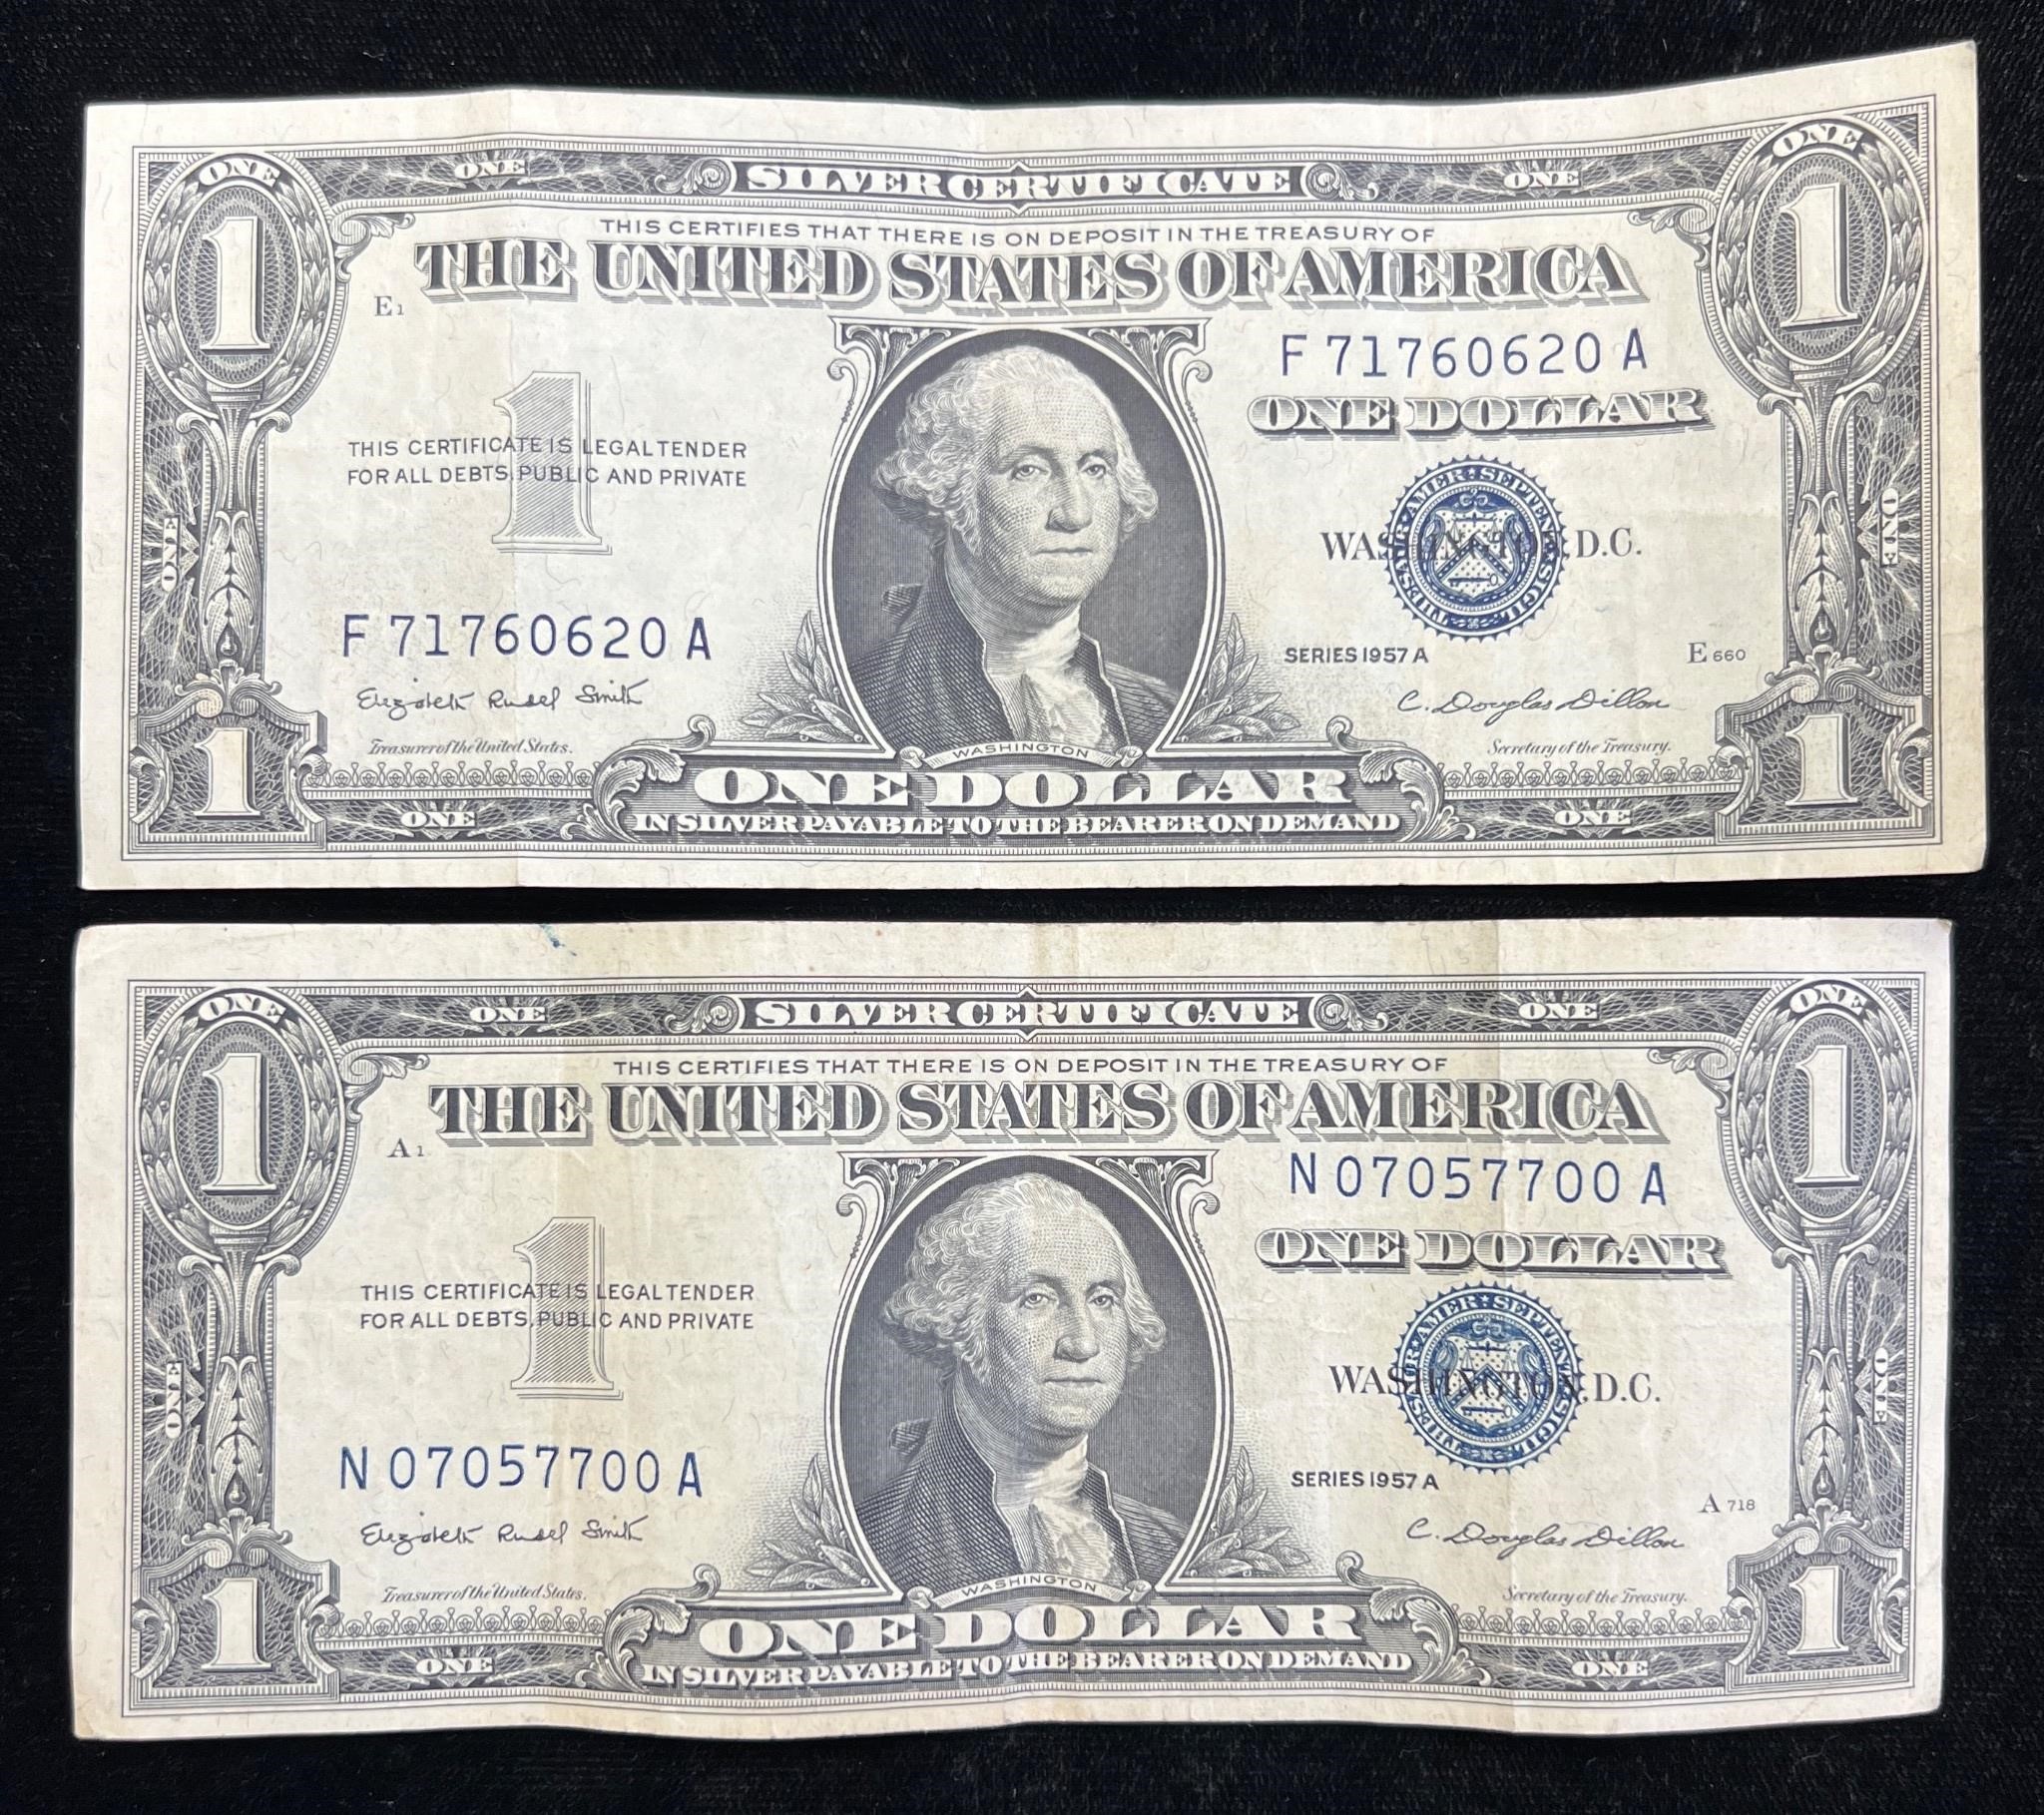 Two 1957 A $1 Silver Certificates